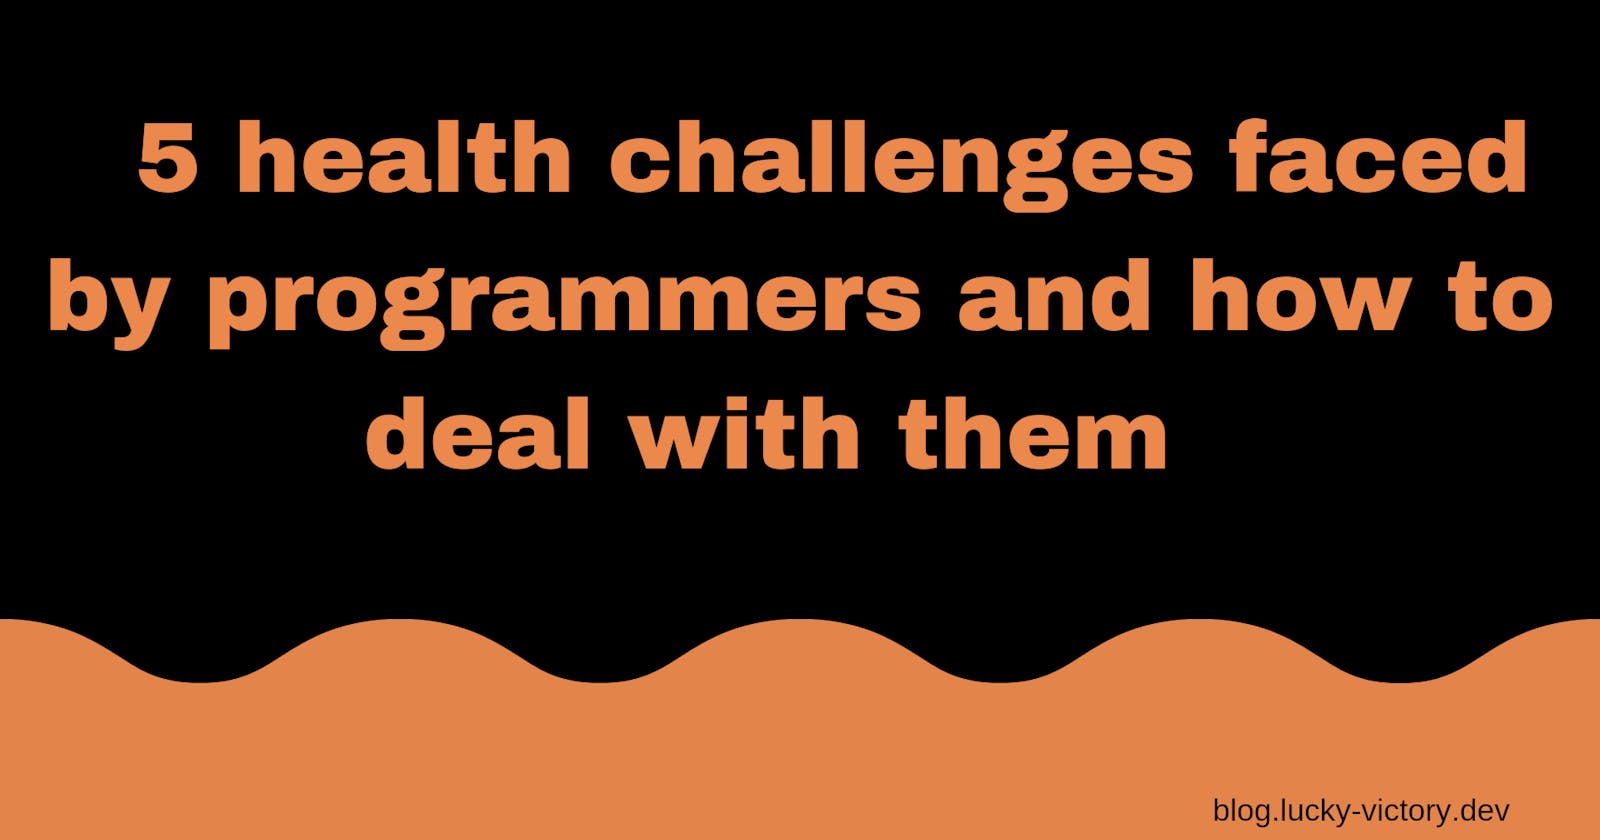 5 health challenges faced by programmers and how to deal with them